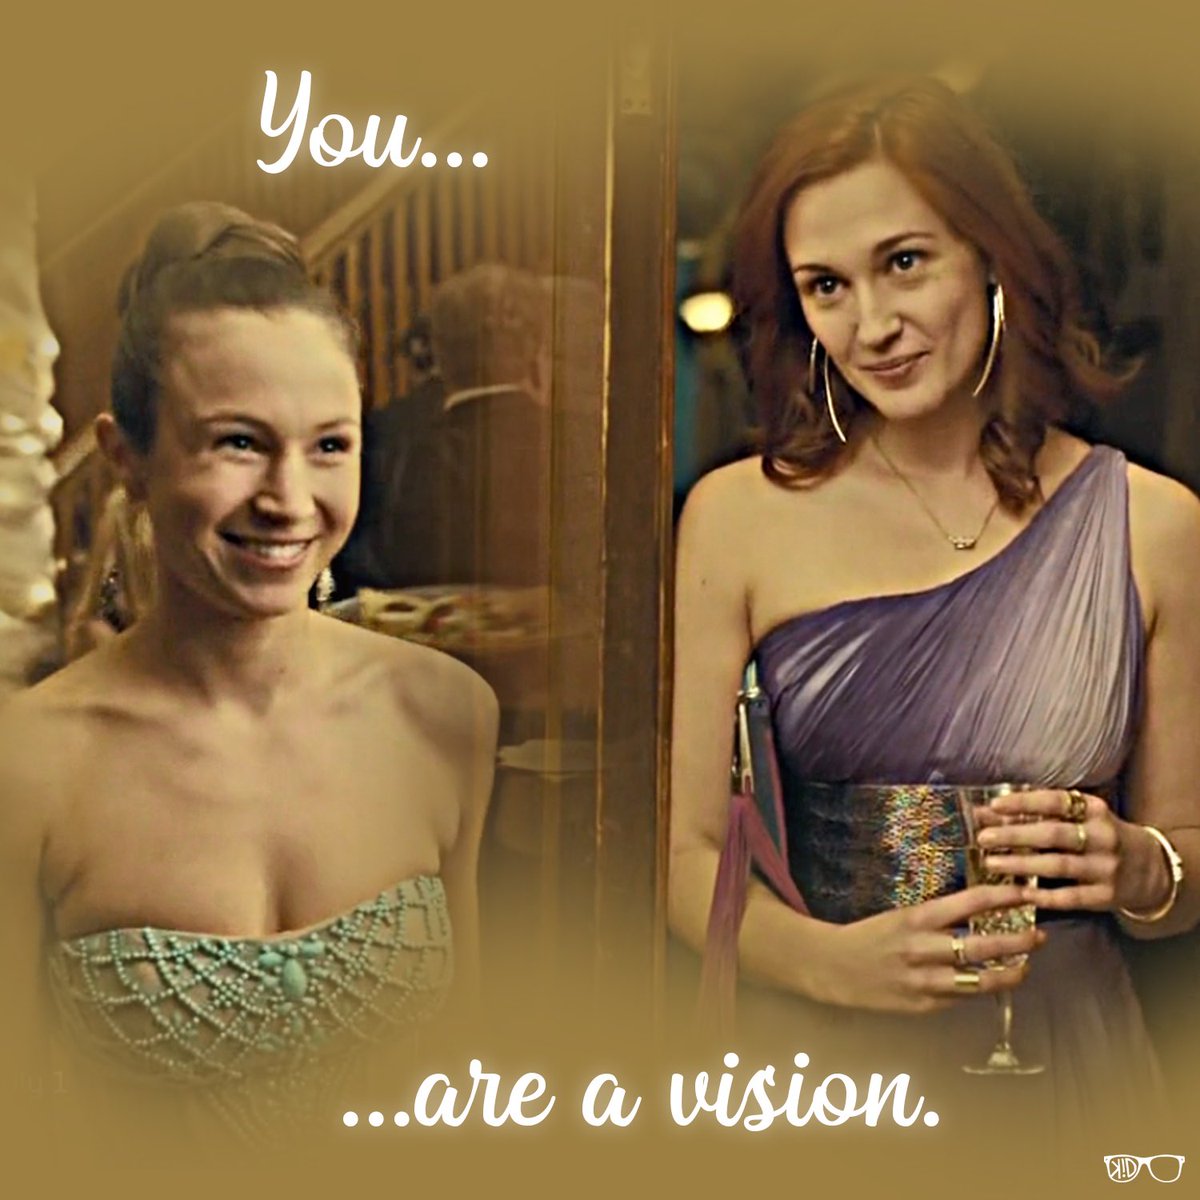 It’s  #WayHaughtWednesday  #Earpers! I’m gonna drop edit of these two soulmates here, well...just because...  S01E12 #NicoleHaught  #WaverlyEarp  #WayHaught  #WynonnaEarp  #EarpNow  #WayHaughtIsEndgame  #WynonnaEarpEdit